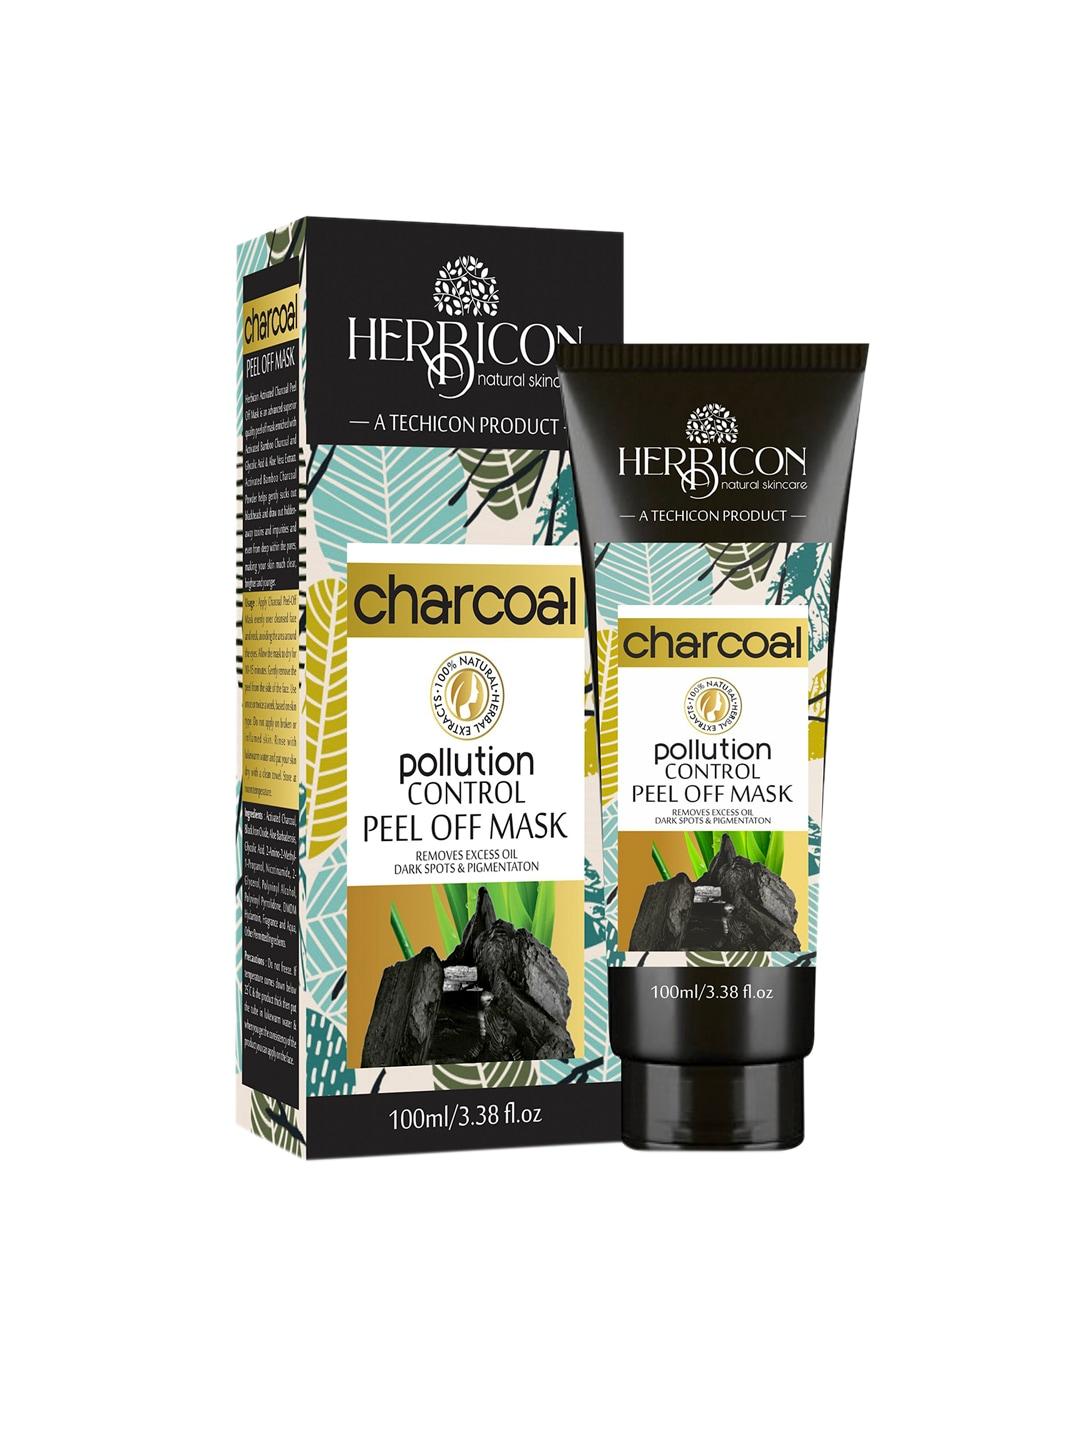 herbicon-activated-bamboo-charcoal-peel-off-mask-100-ml